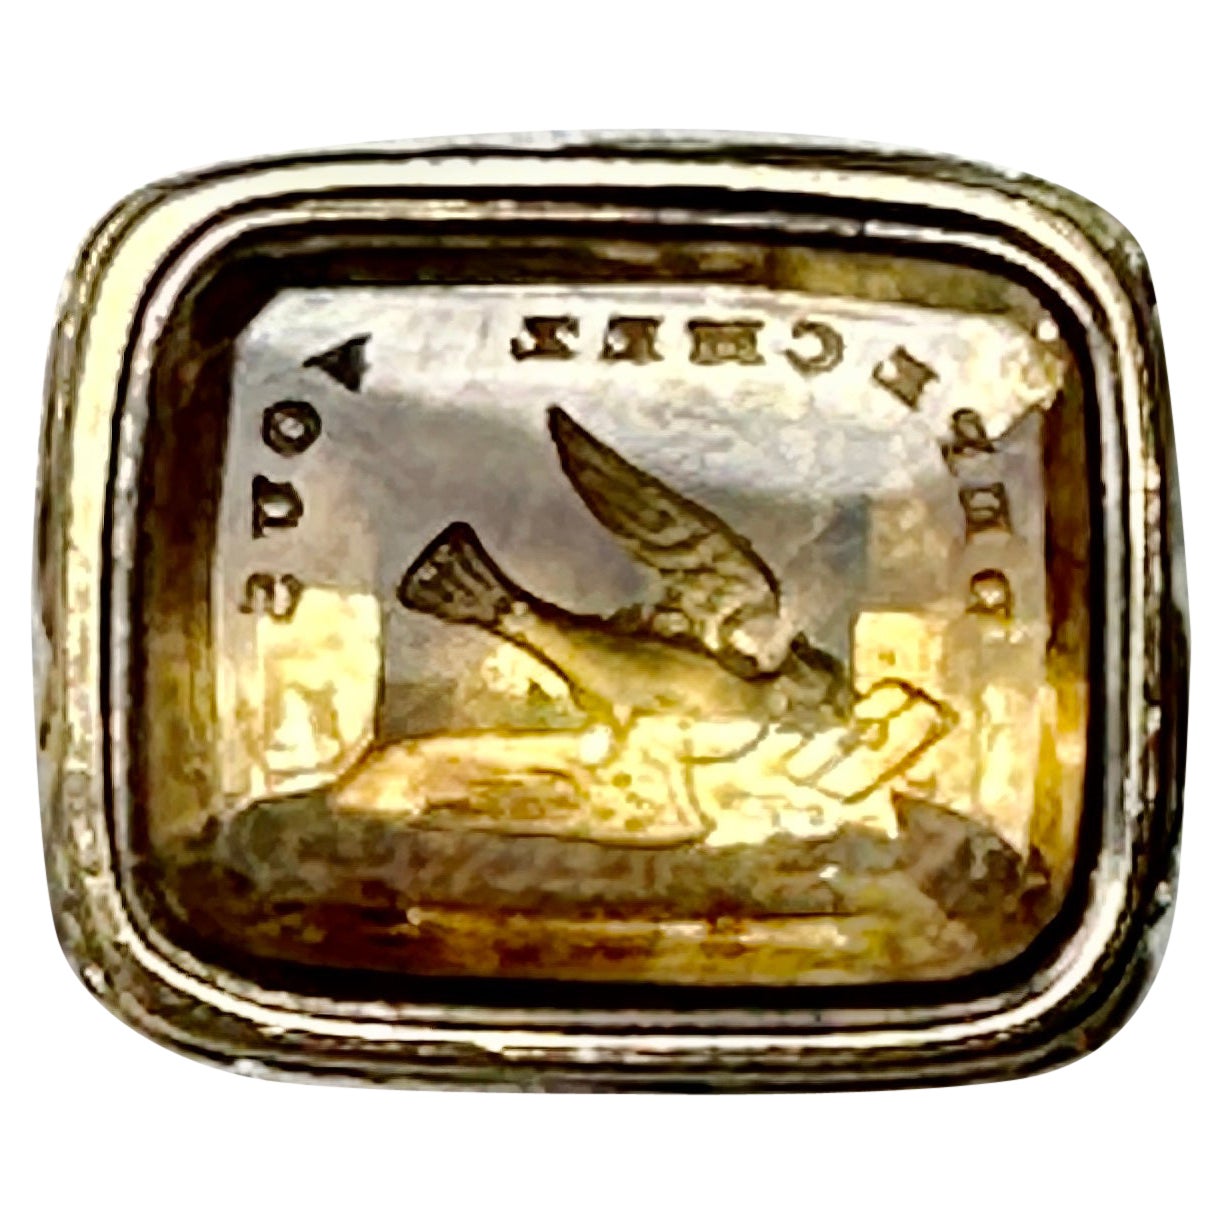 Citrine Bird Carrying Mail Fob Seal Pendant "Depeche Vous" "Hurry Up" Victorian For Sale